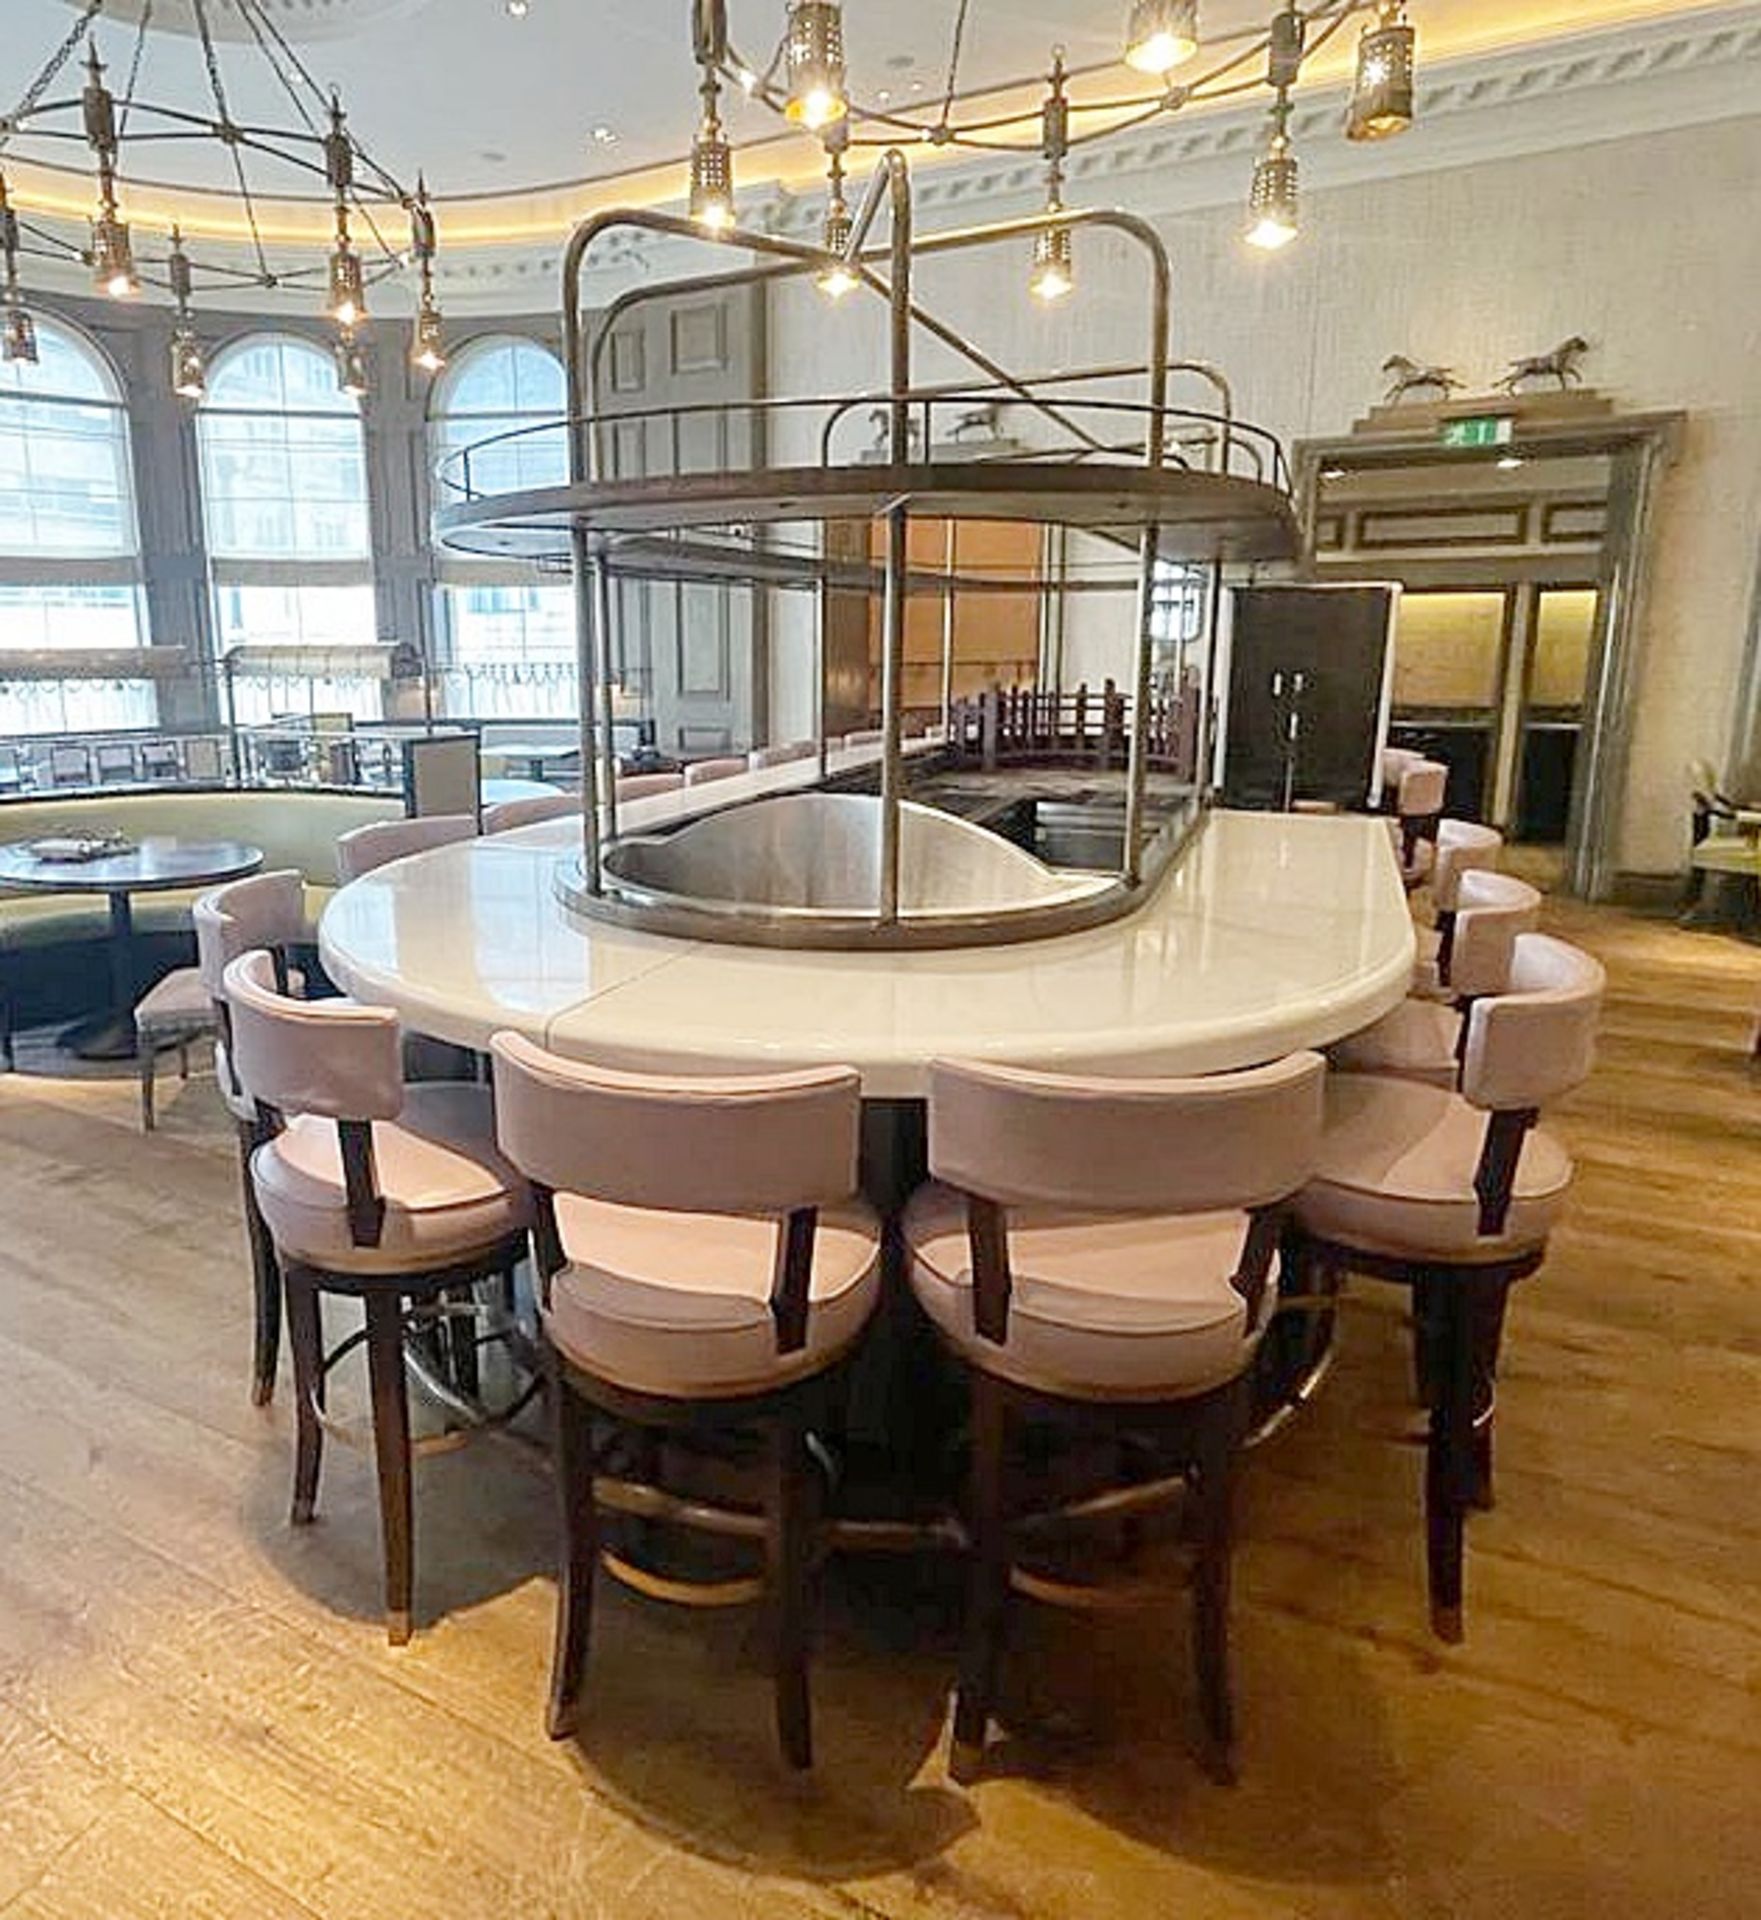 1 x Luxury Curved Restaurant 5.5-Metre Centrepiece Bar, Clad in Timber & Leather with 18 x Stools - Image 26 of 72